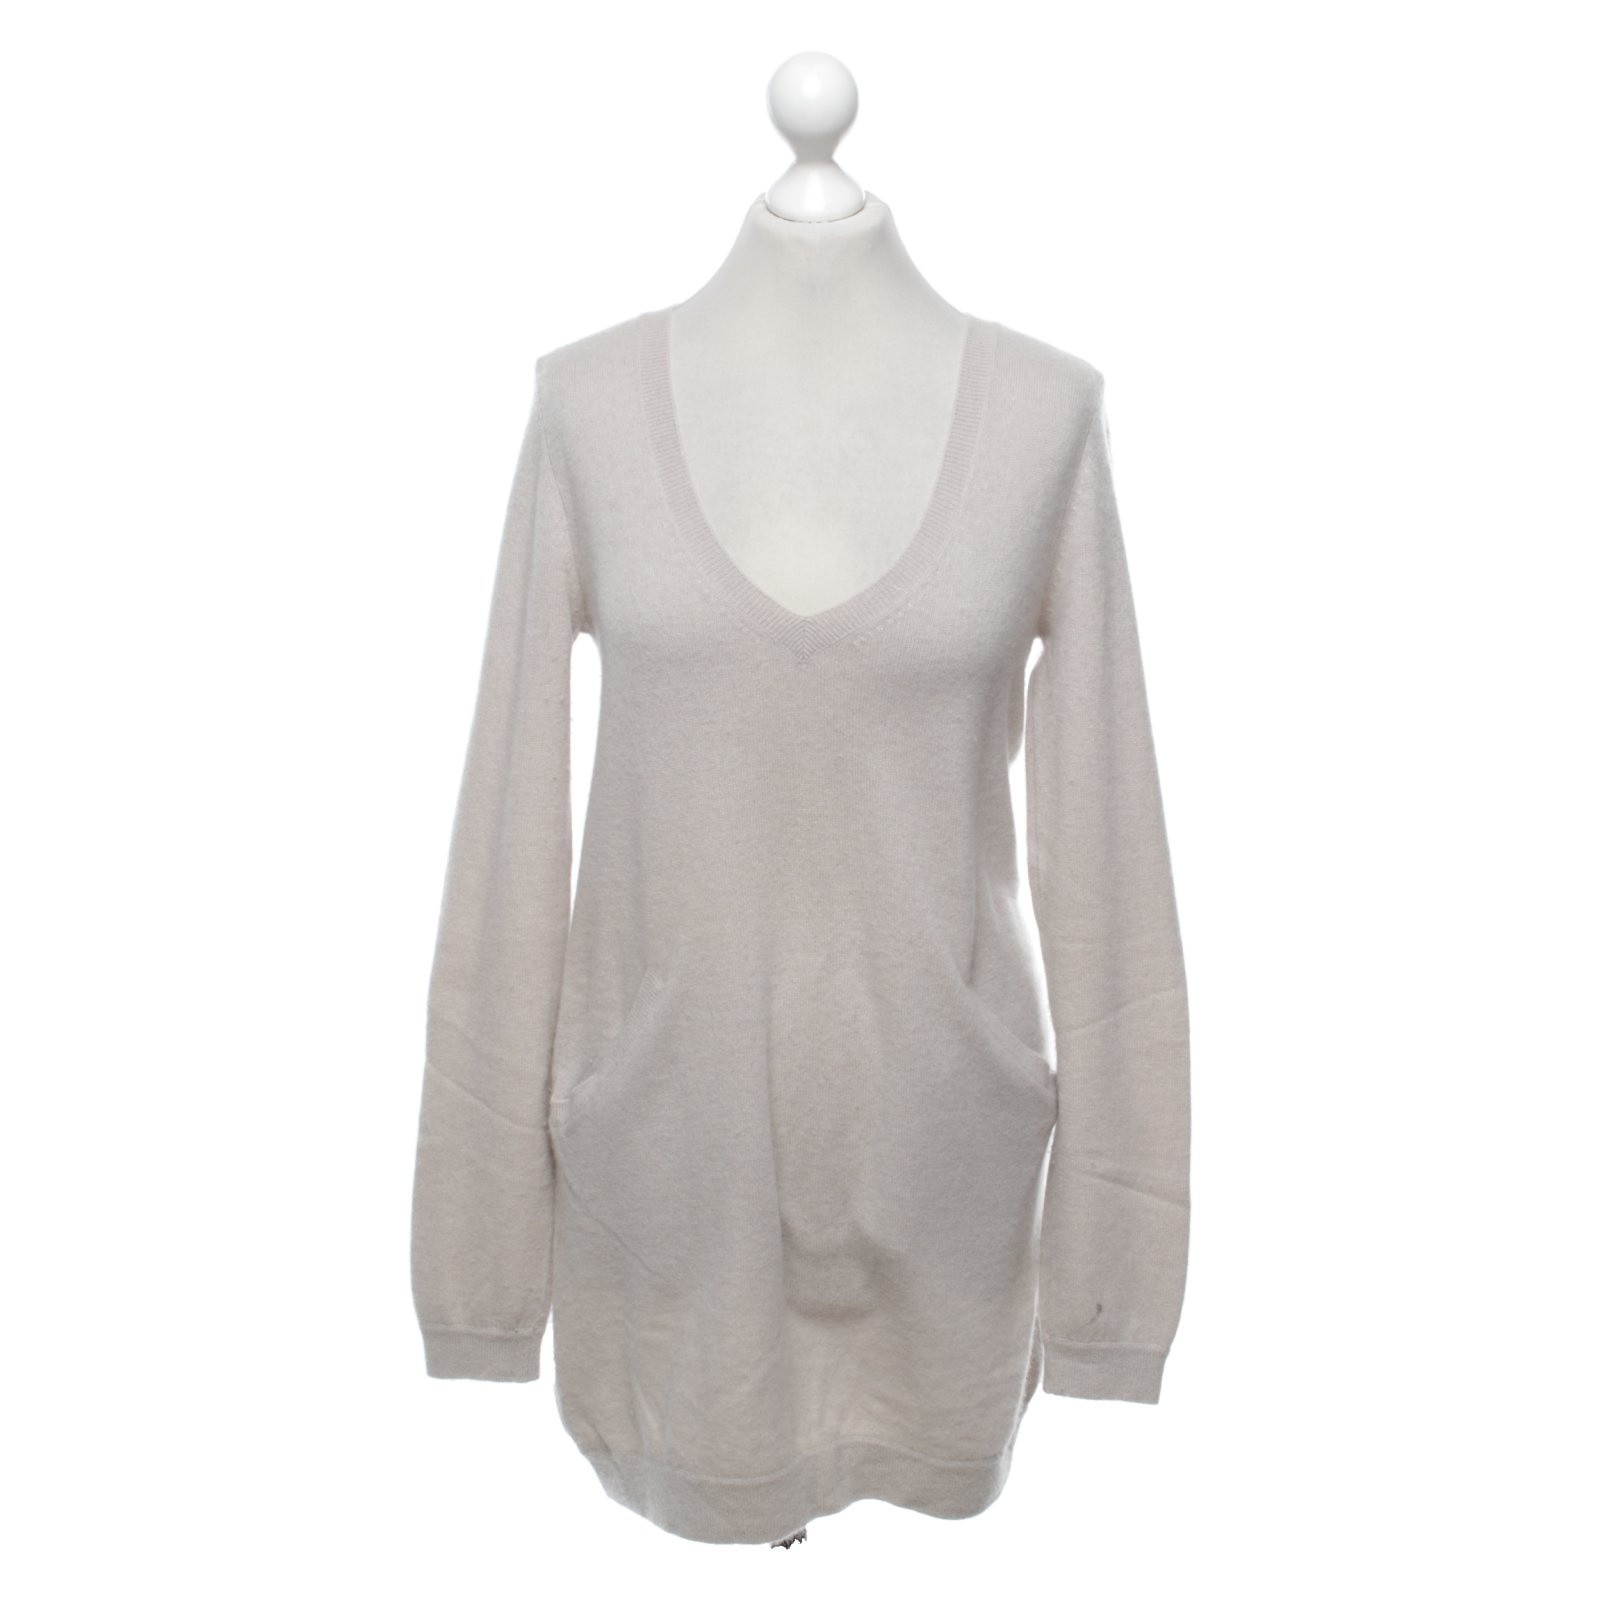 Allude Cashmere Sweater Second Hand Allude Cashmere Sweater Buy Used For 50